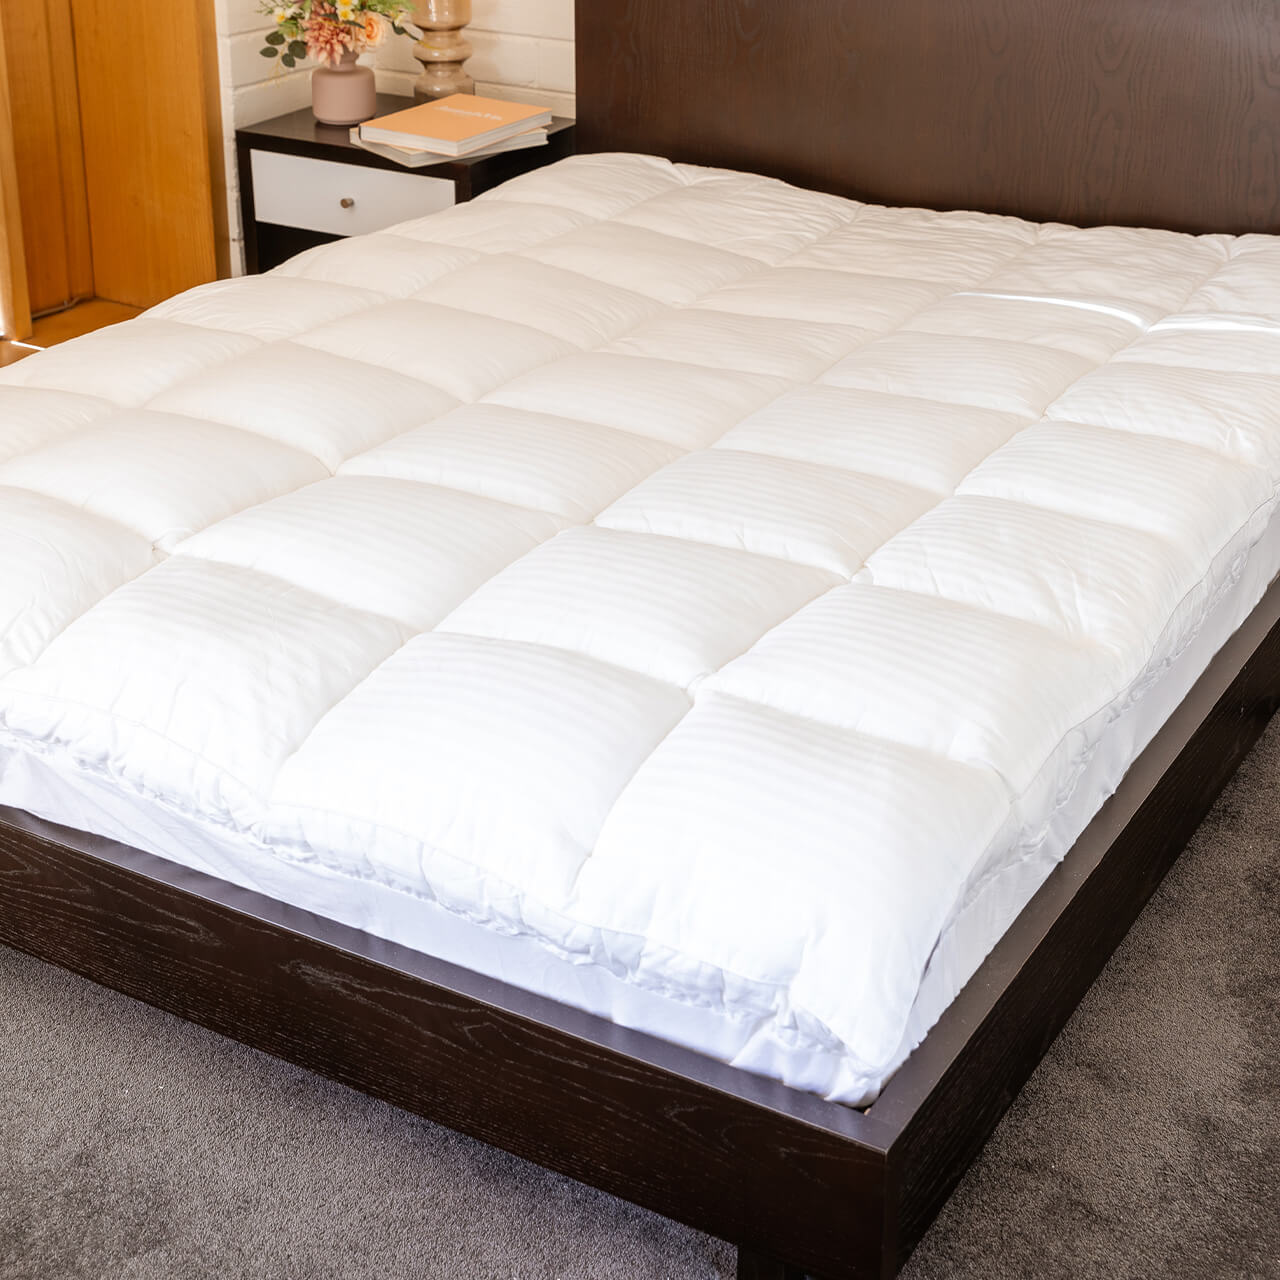 Lifestyle shot of Microfibre Mattress Topper on bed